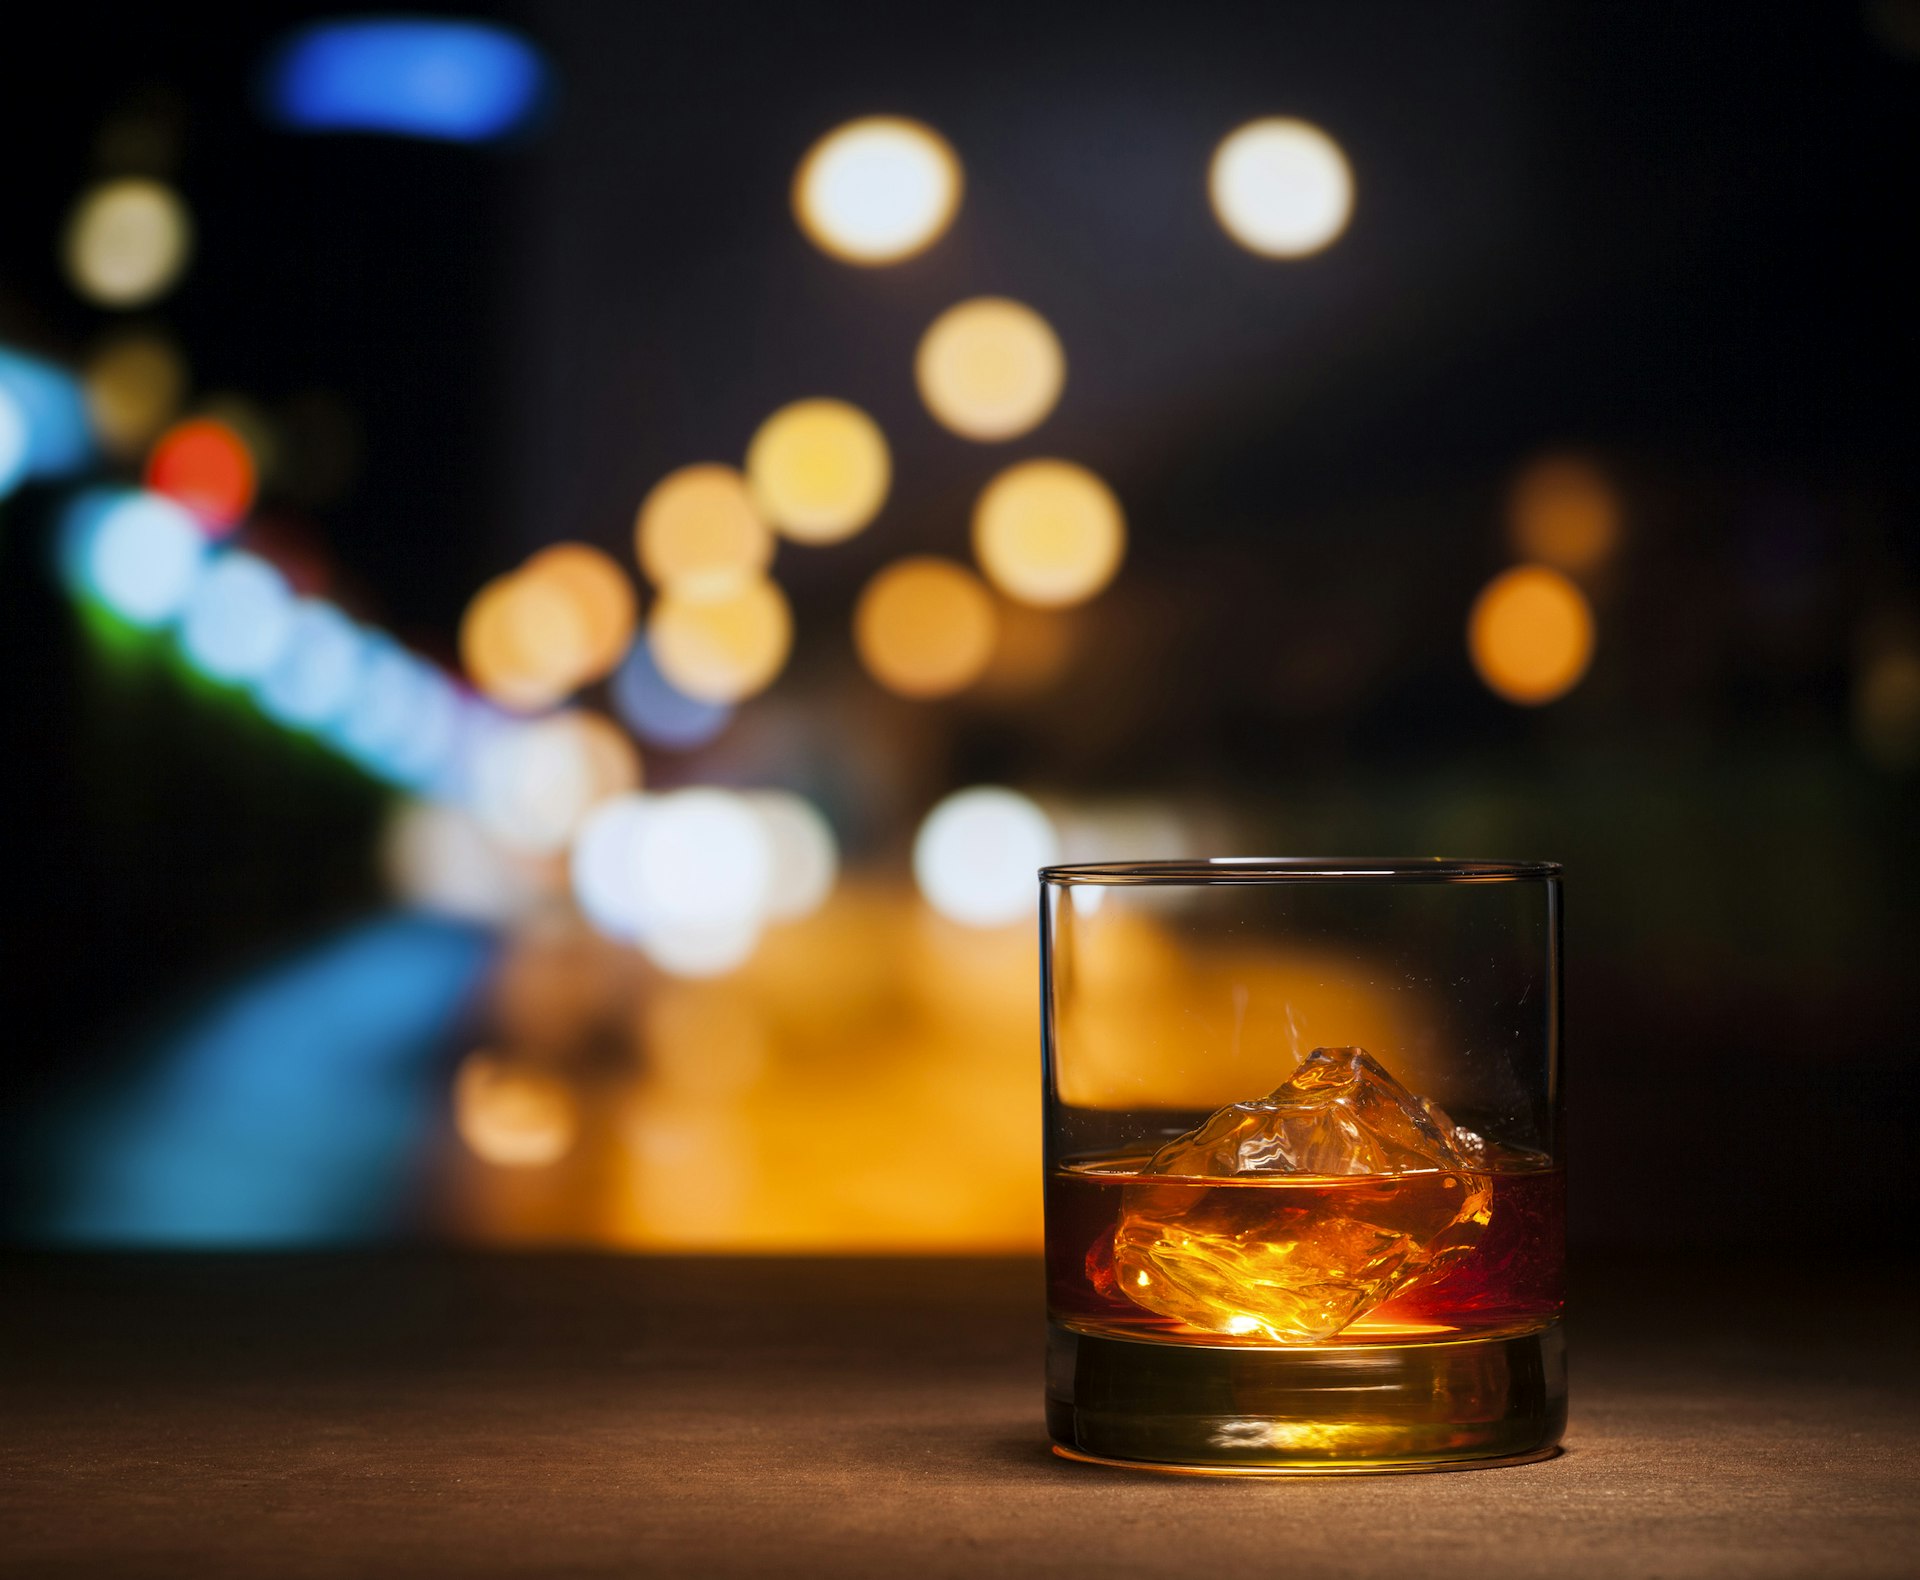 Features - Whisky in night background